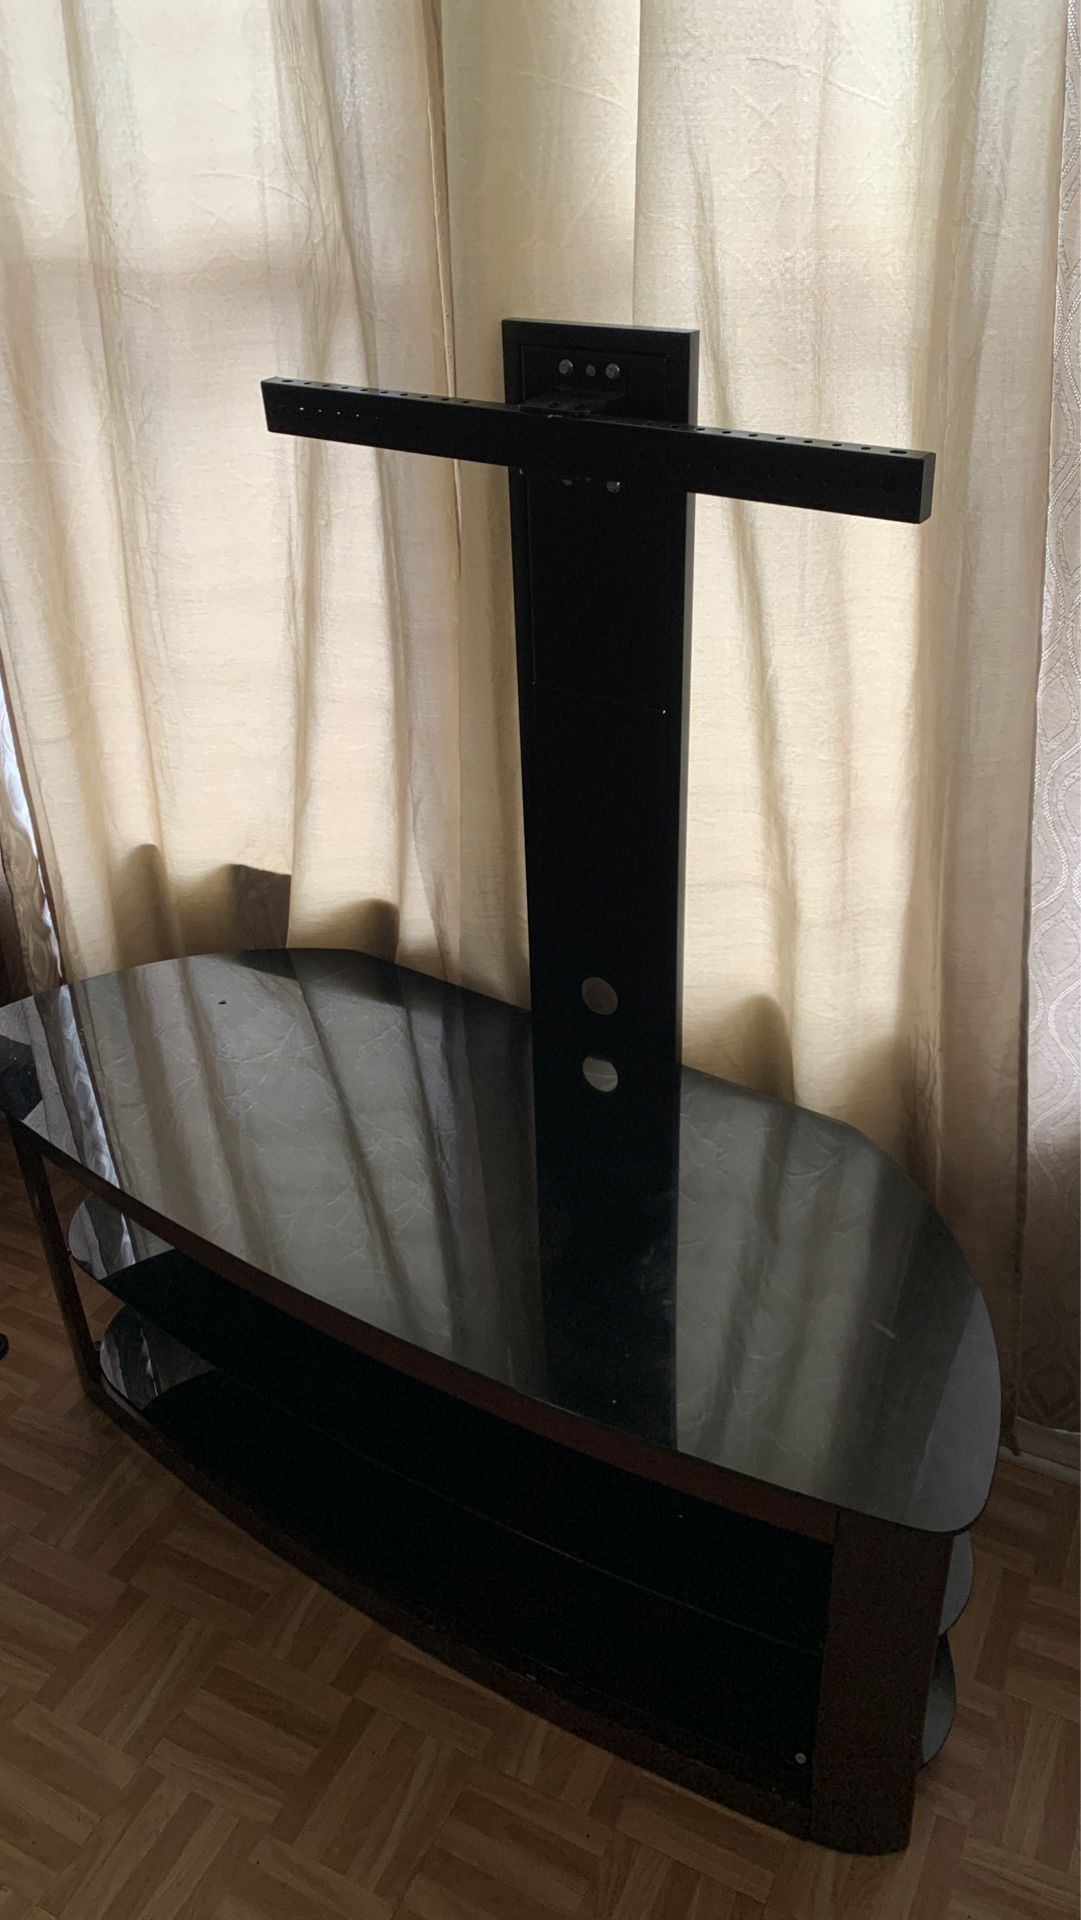 Tv stand with mount